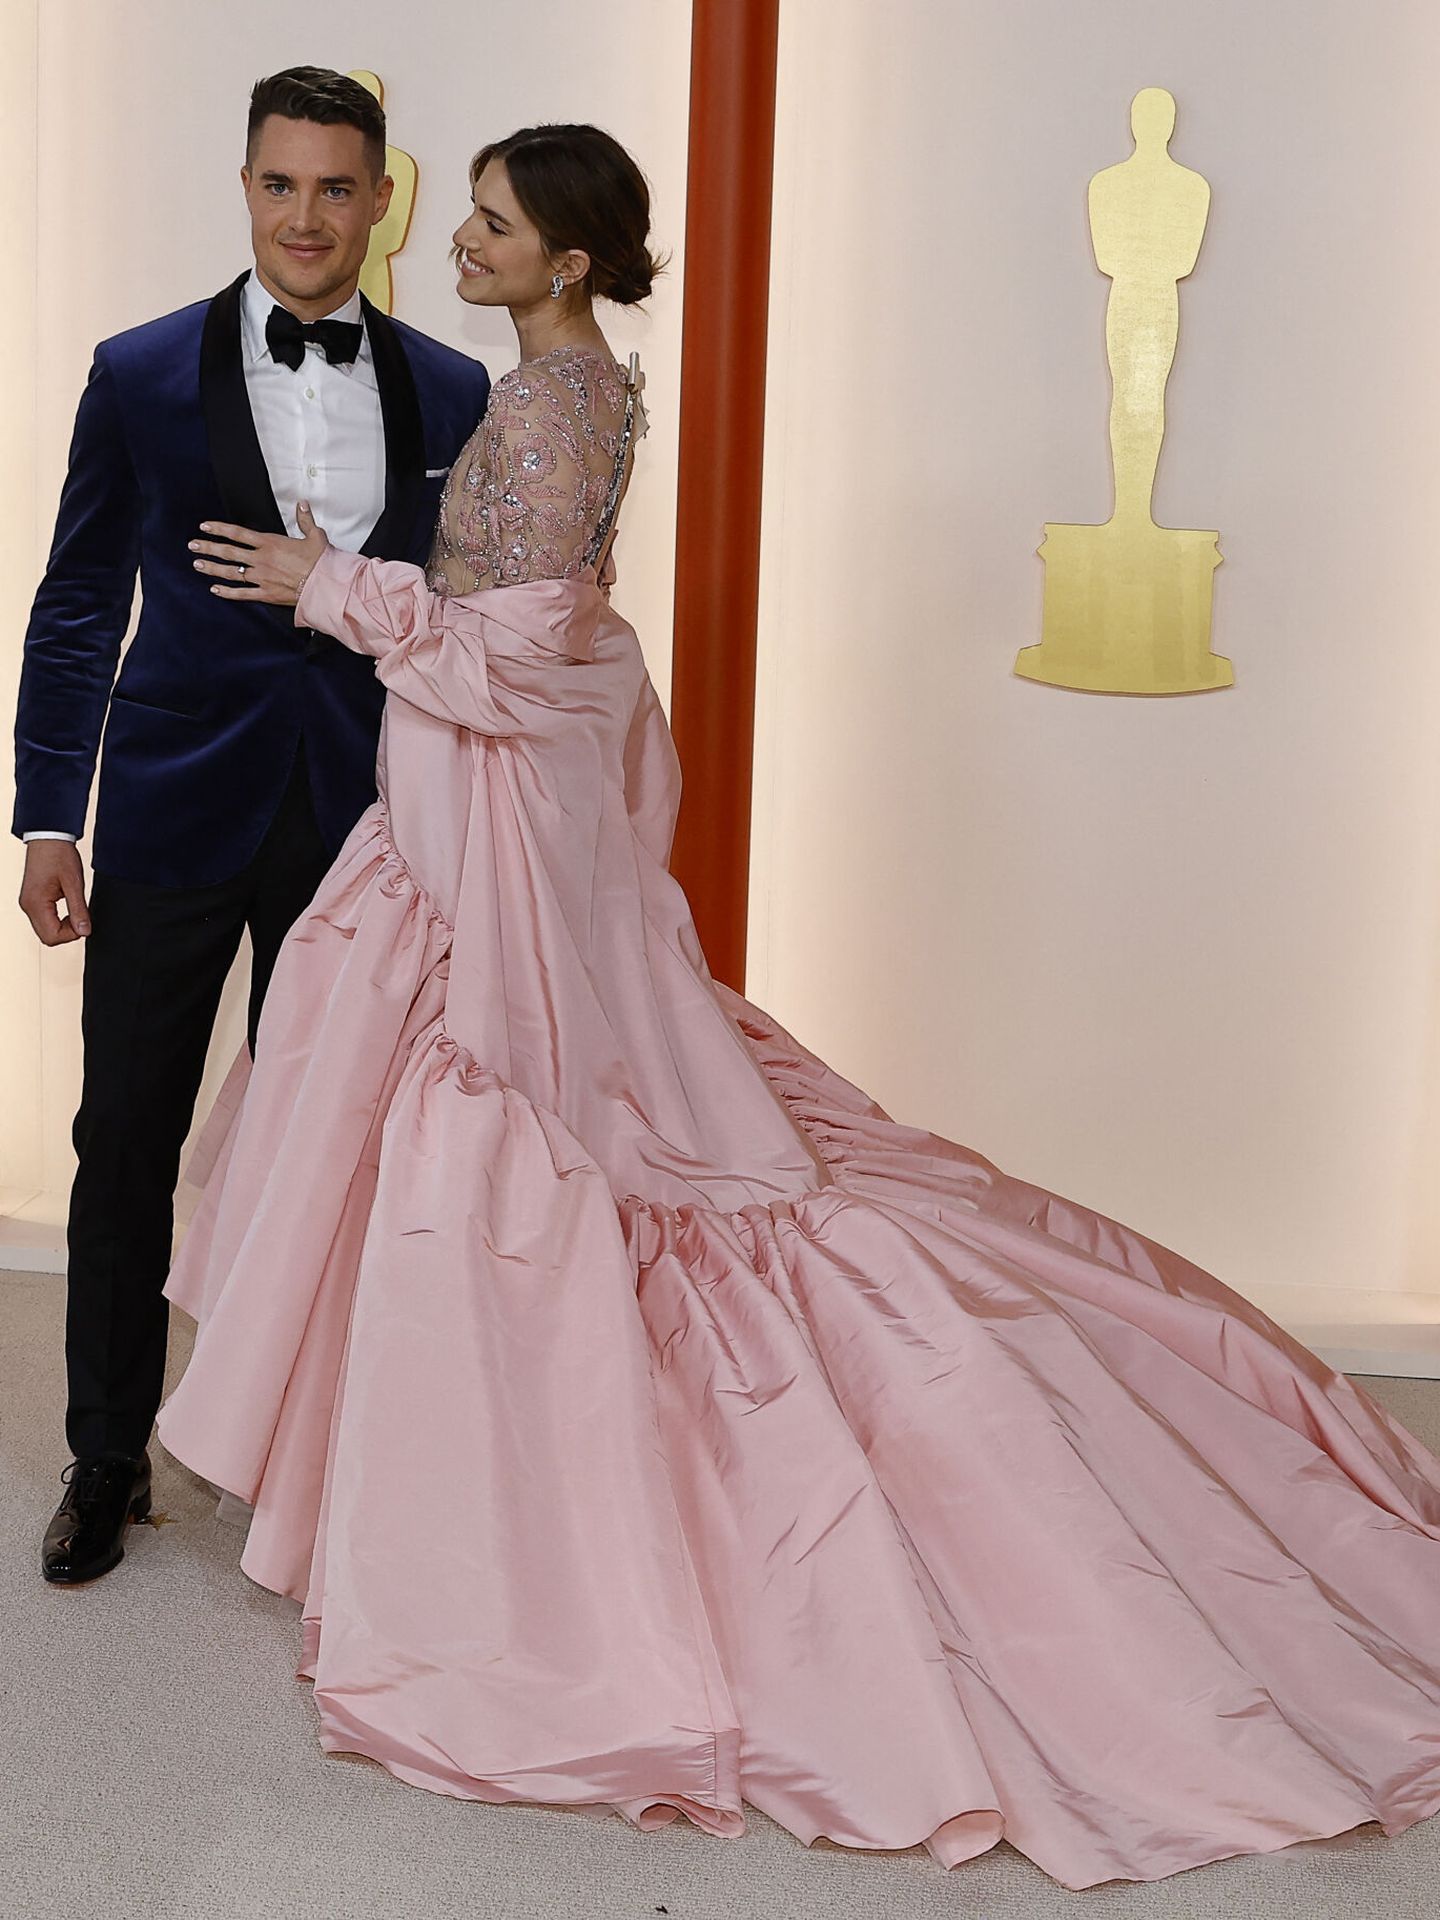 Allison Williams and Alexander Dreymon pose on the champagne-colored red carpet during the Oscars arrivals at the 95th Academy Awards in Hollywood, Los Angeles, California, U.S., March 12, 2023. REUTERS Eric Gaillard